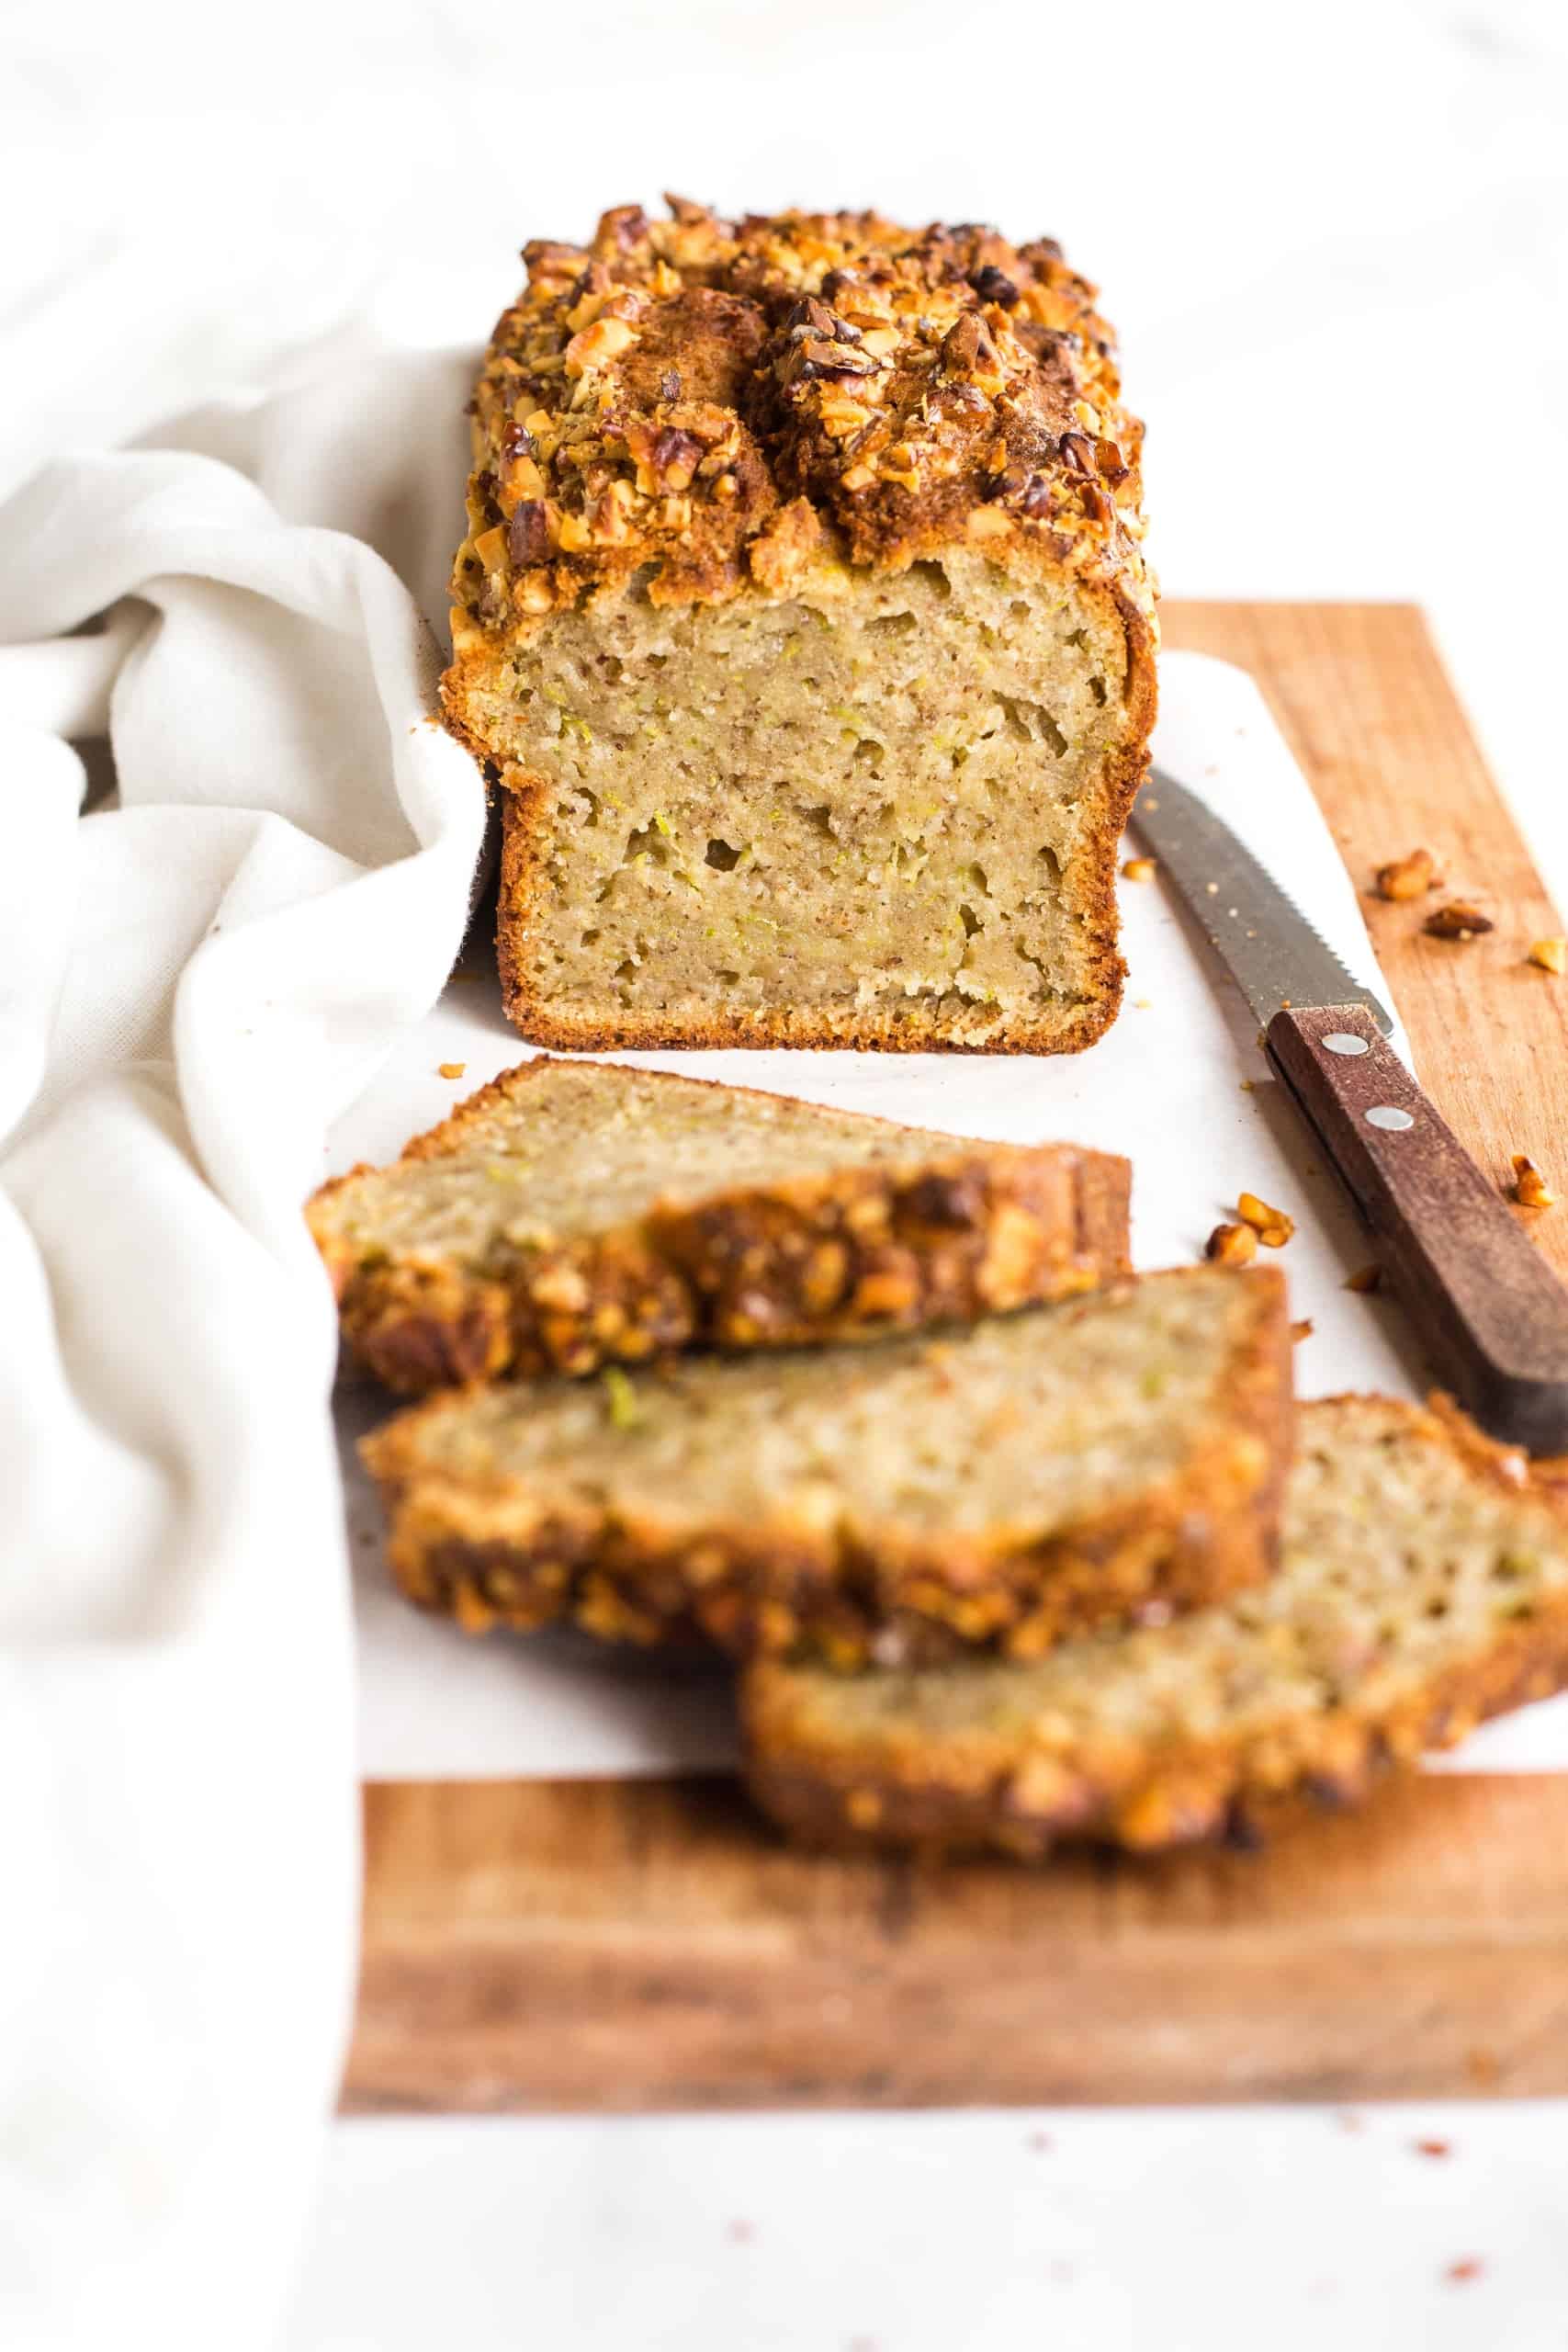 Half-sliced loaf of gluten-free zucchini bread on a parchment-lined wooden board.